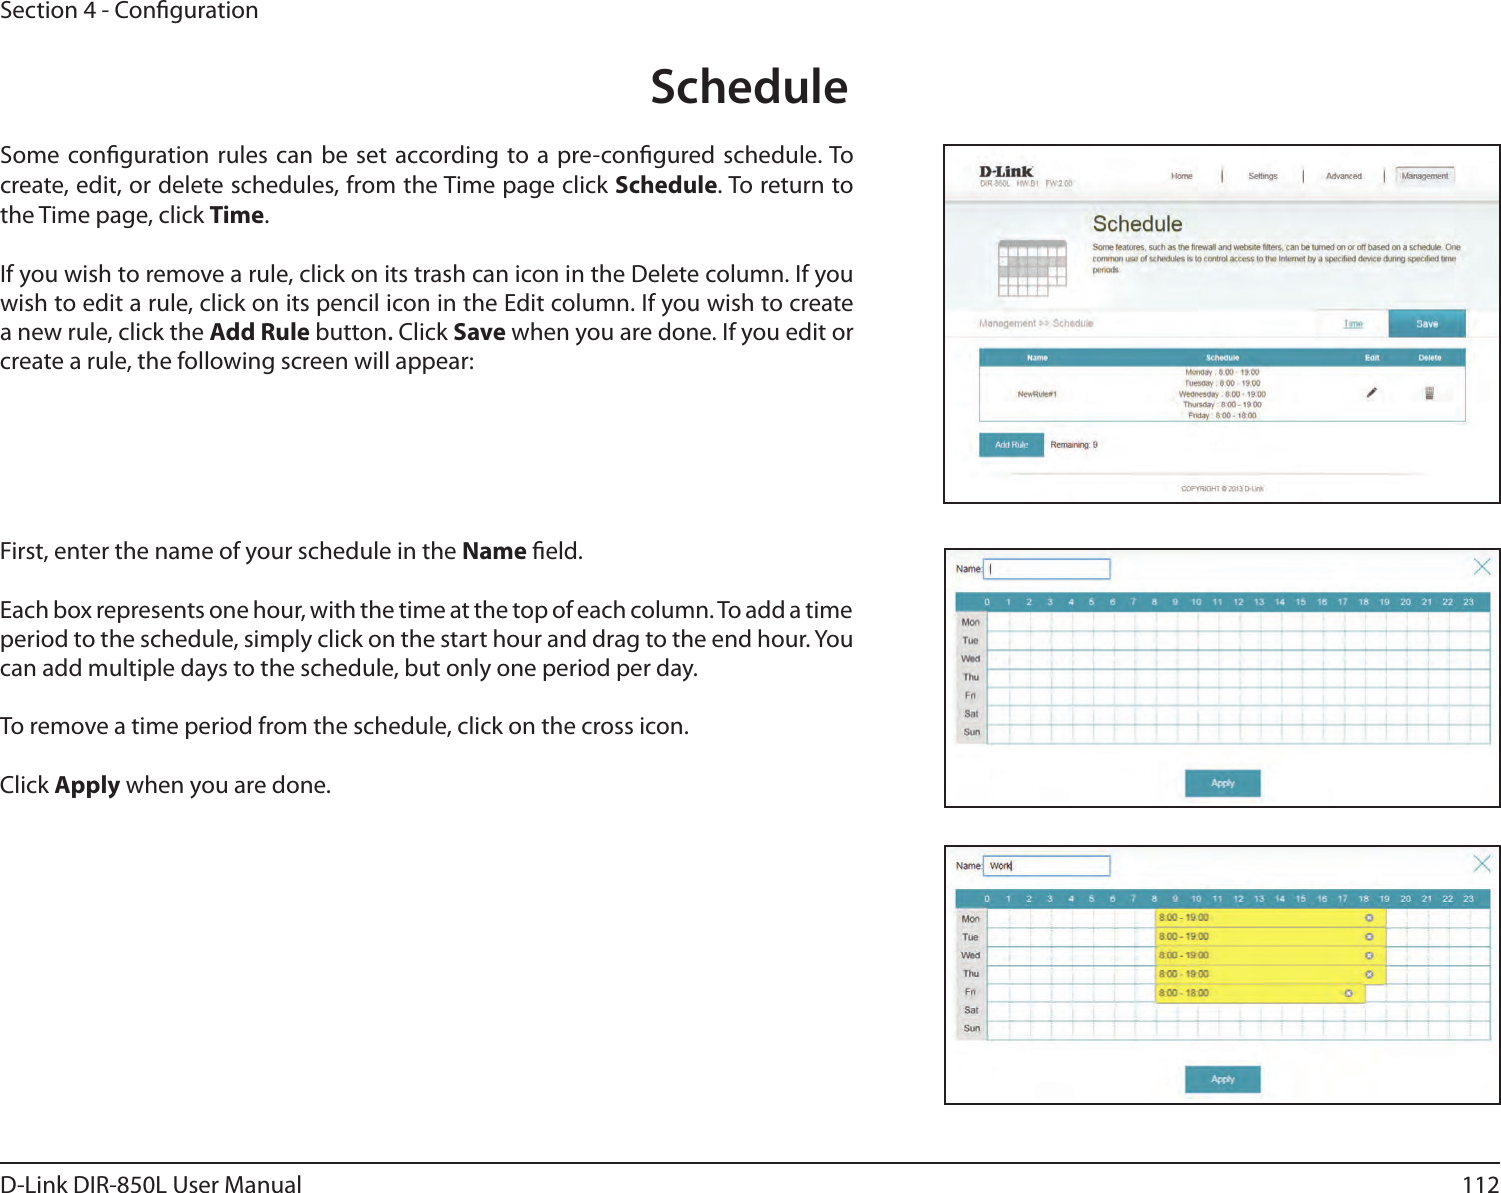 112D-Link DIR-850L User ManualSection 4 - CongurationScheduleSome conguration rules can be set according to a pre-congured schedule. To create, edit, or delete schedules, from the Time page click Schedule. To return to the Time page, click Time. If you wish to remove a rule, click on its trash can icon in the Delete column. If you wish to edit a rule, click on its pencil icon in the Edit column. If you wish to create a new rule, click the Add Rule button. Click Save when you are done. If you edit or create a rule, the following screen will appear:First, enter the name of your schedule in the Name eld.Each box represents one hour, with the time at the top of each column. To add a time period to the schedule, simply click on the start hour and drag to the end hour. You can add multiple days to the schedule, but only one period per day.To remove a time period from the schedule, click on the cross icon.Click Apply when you are done.